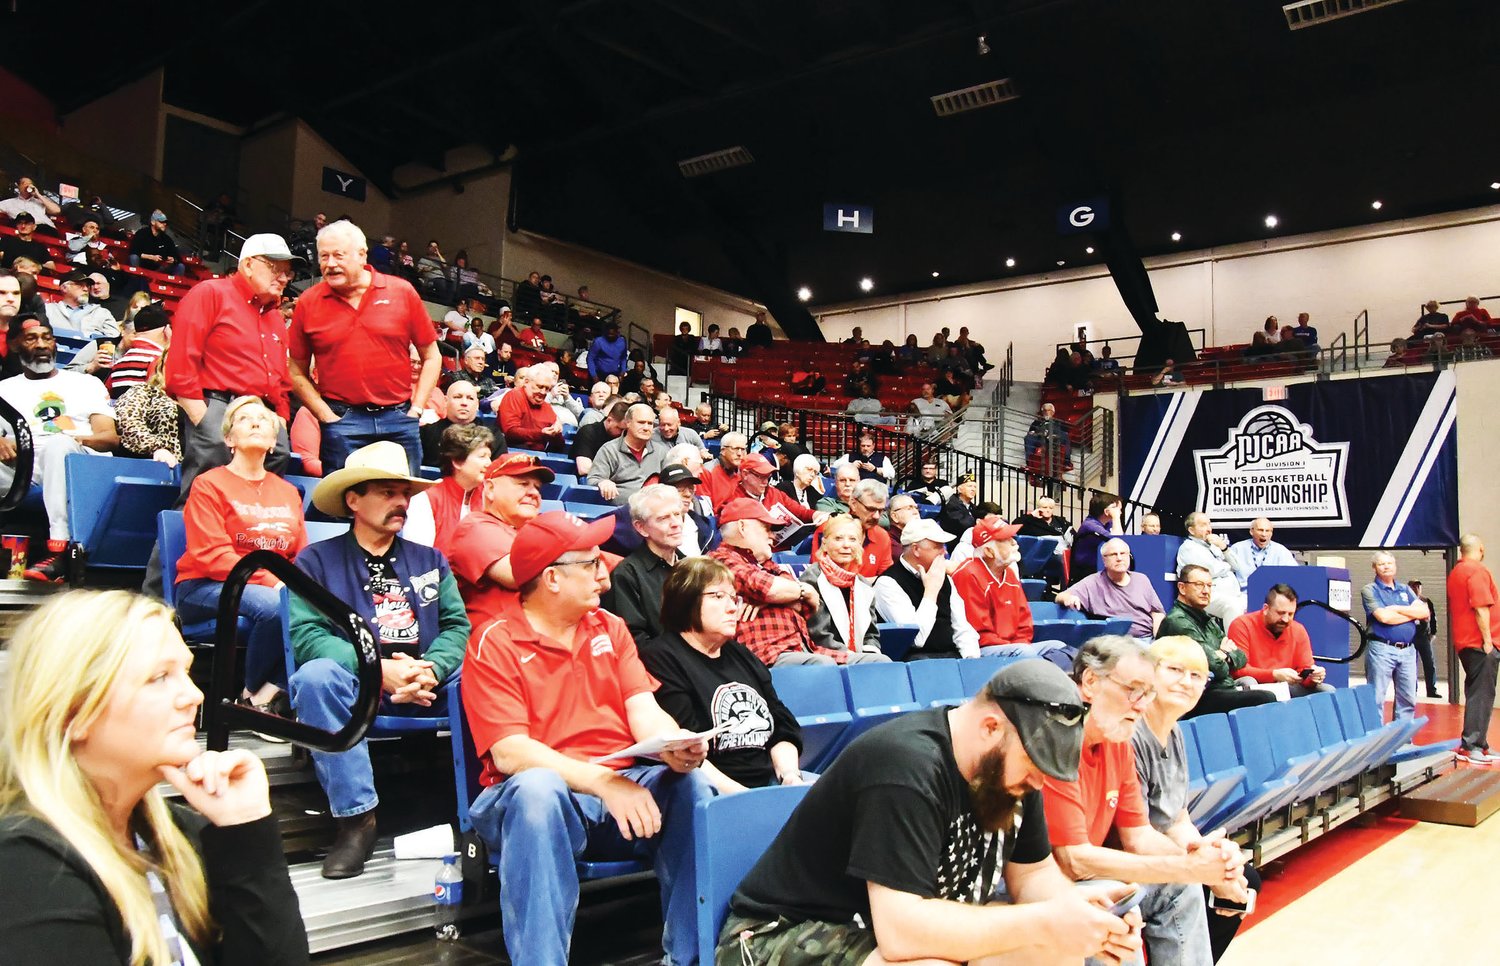 As usual, Moberly Area Community College fans traveled well to the NJCAA Division I national men's tournament. It's roughly a near 11-hour round trip from Hutchinson, Kan.